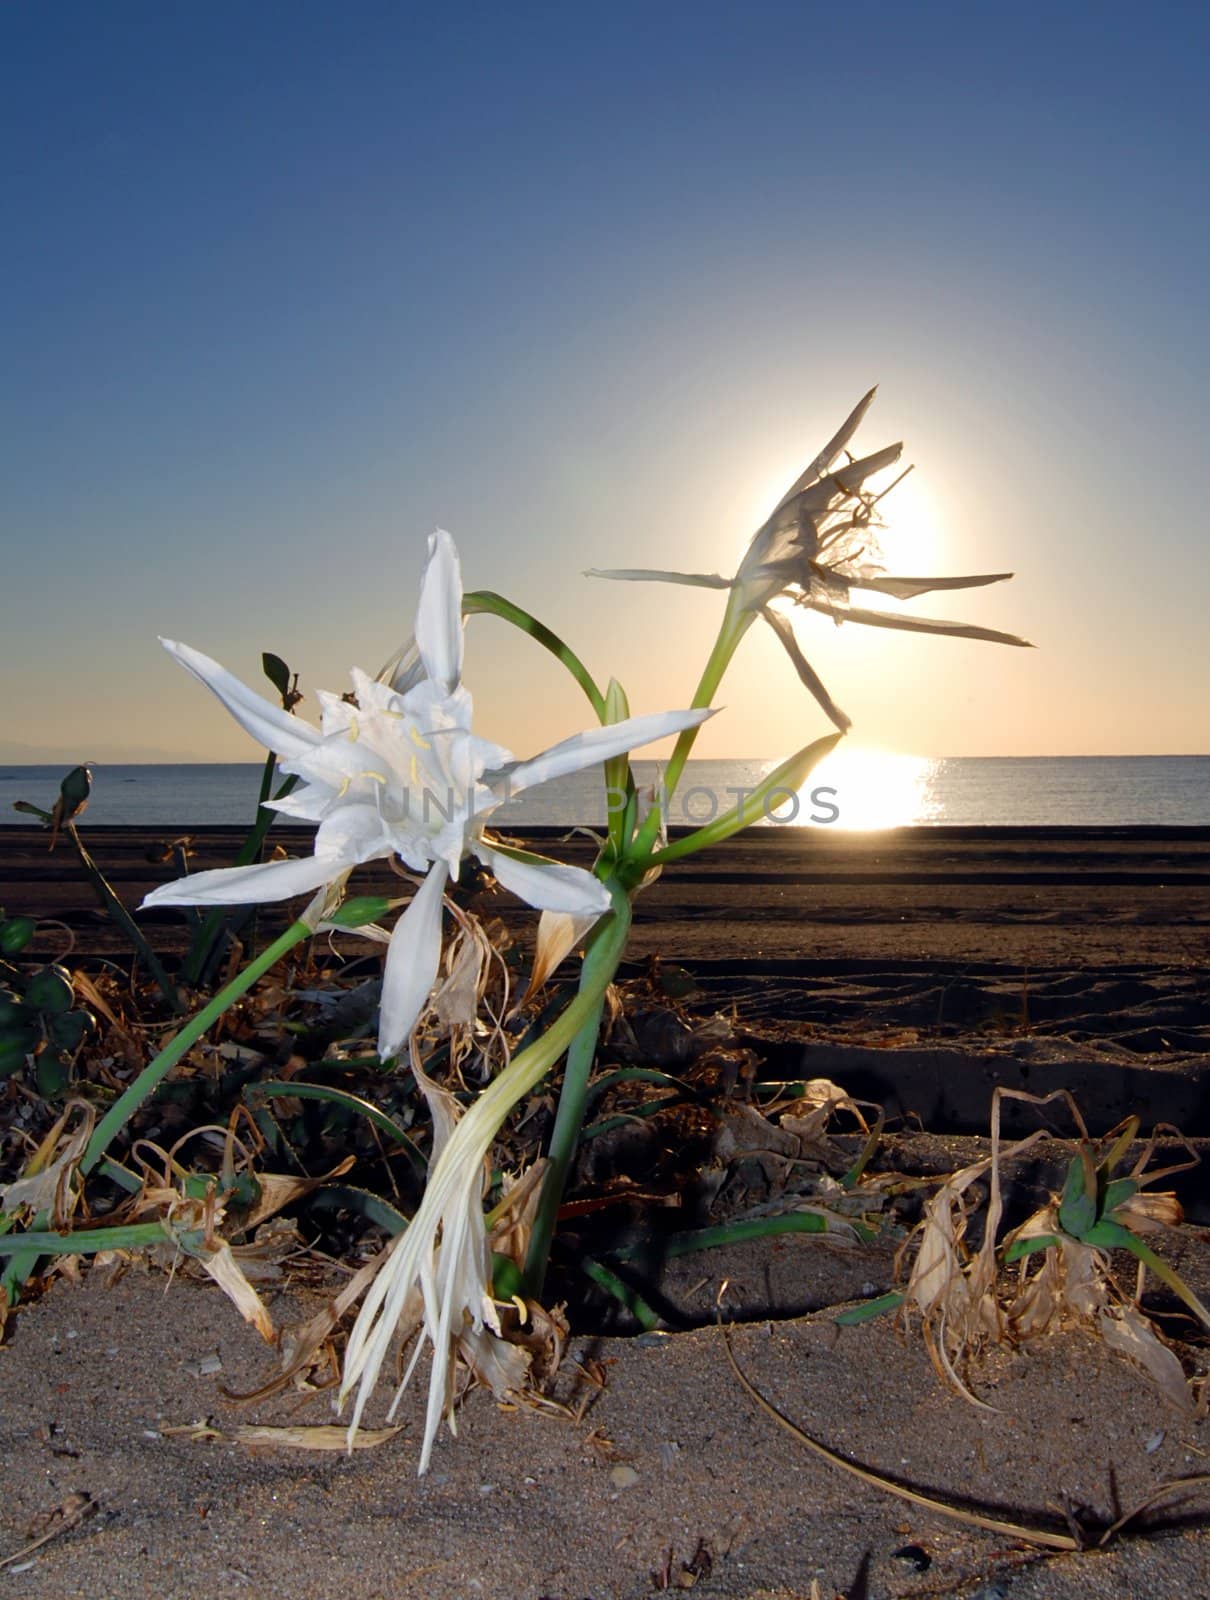 Beautiful desert lily growing on the beach with sun rays through petals